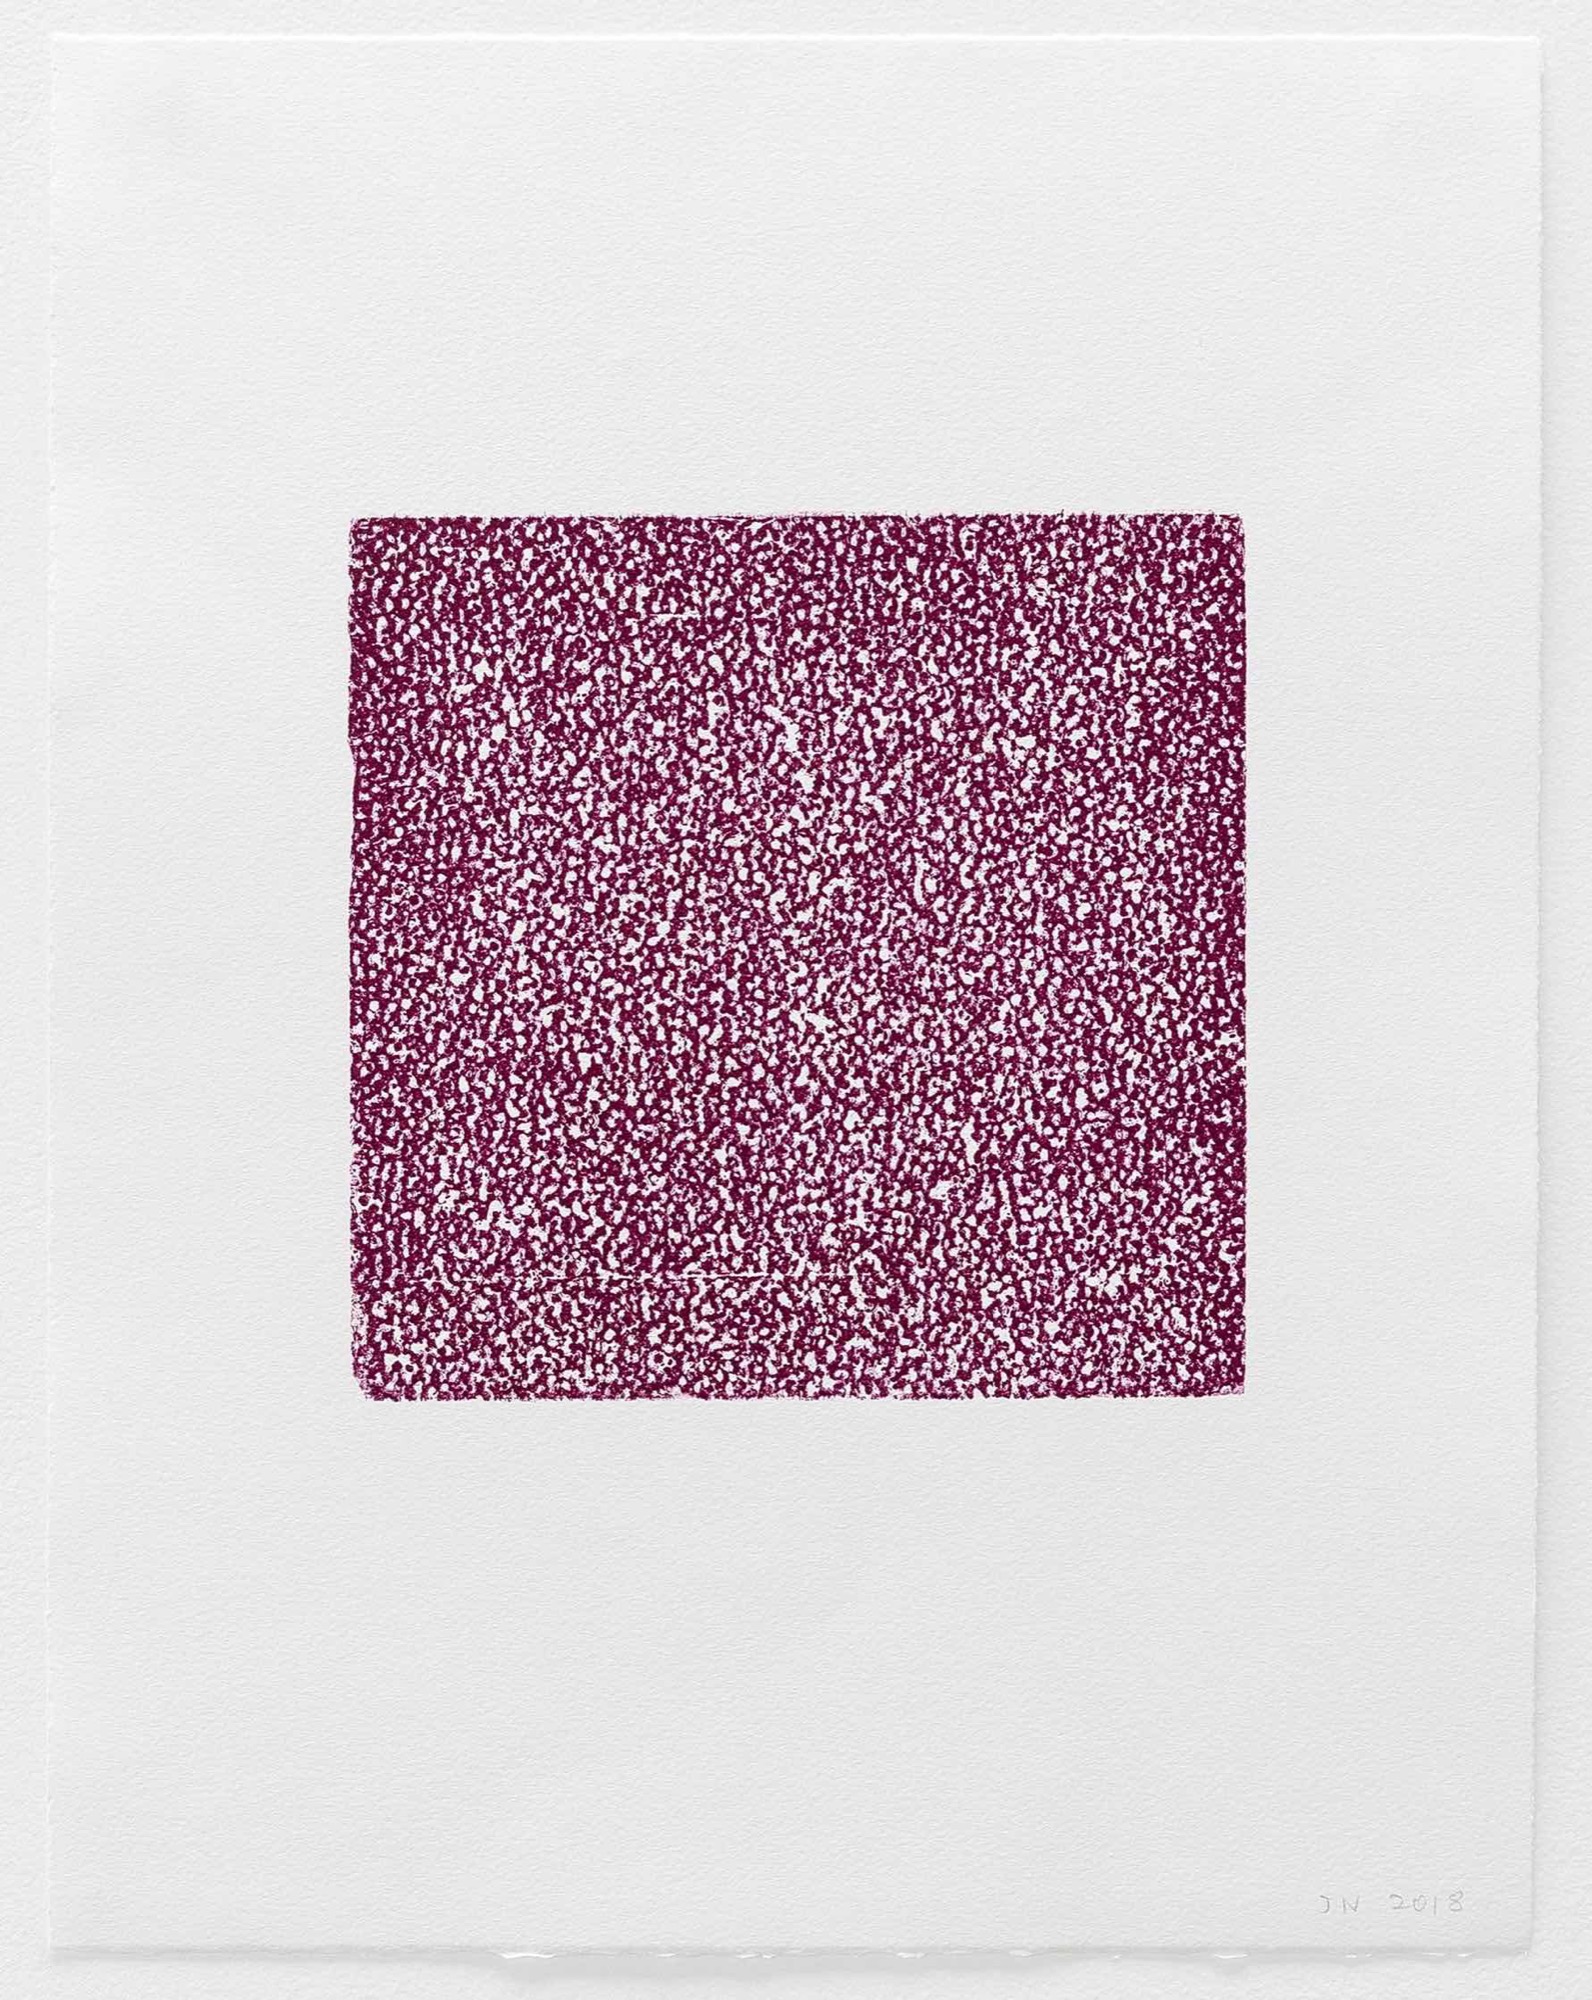 John Nixon (printer, Trent Walter), <em>Untitled (Set D)</em> (detail), 2018, relief print, printed in magenta ink, from one polystyrene block, 49.0 x 38.0 cm, edition: 1/1. Published by Negative Press. Photograph: Andrew Curtis.